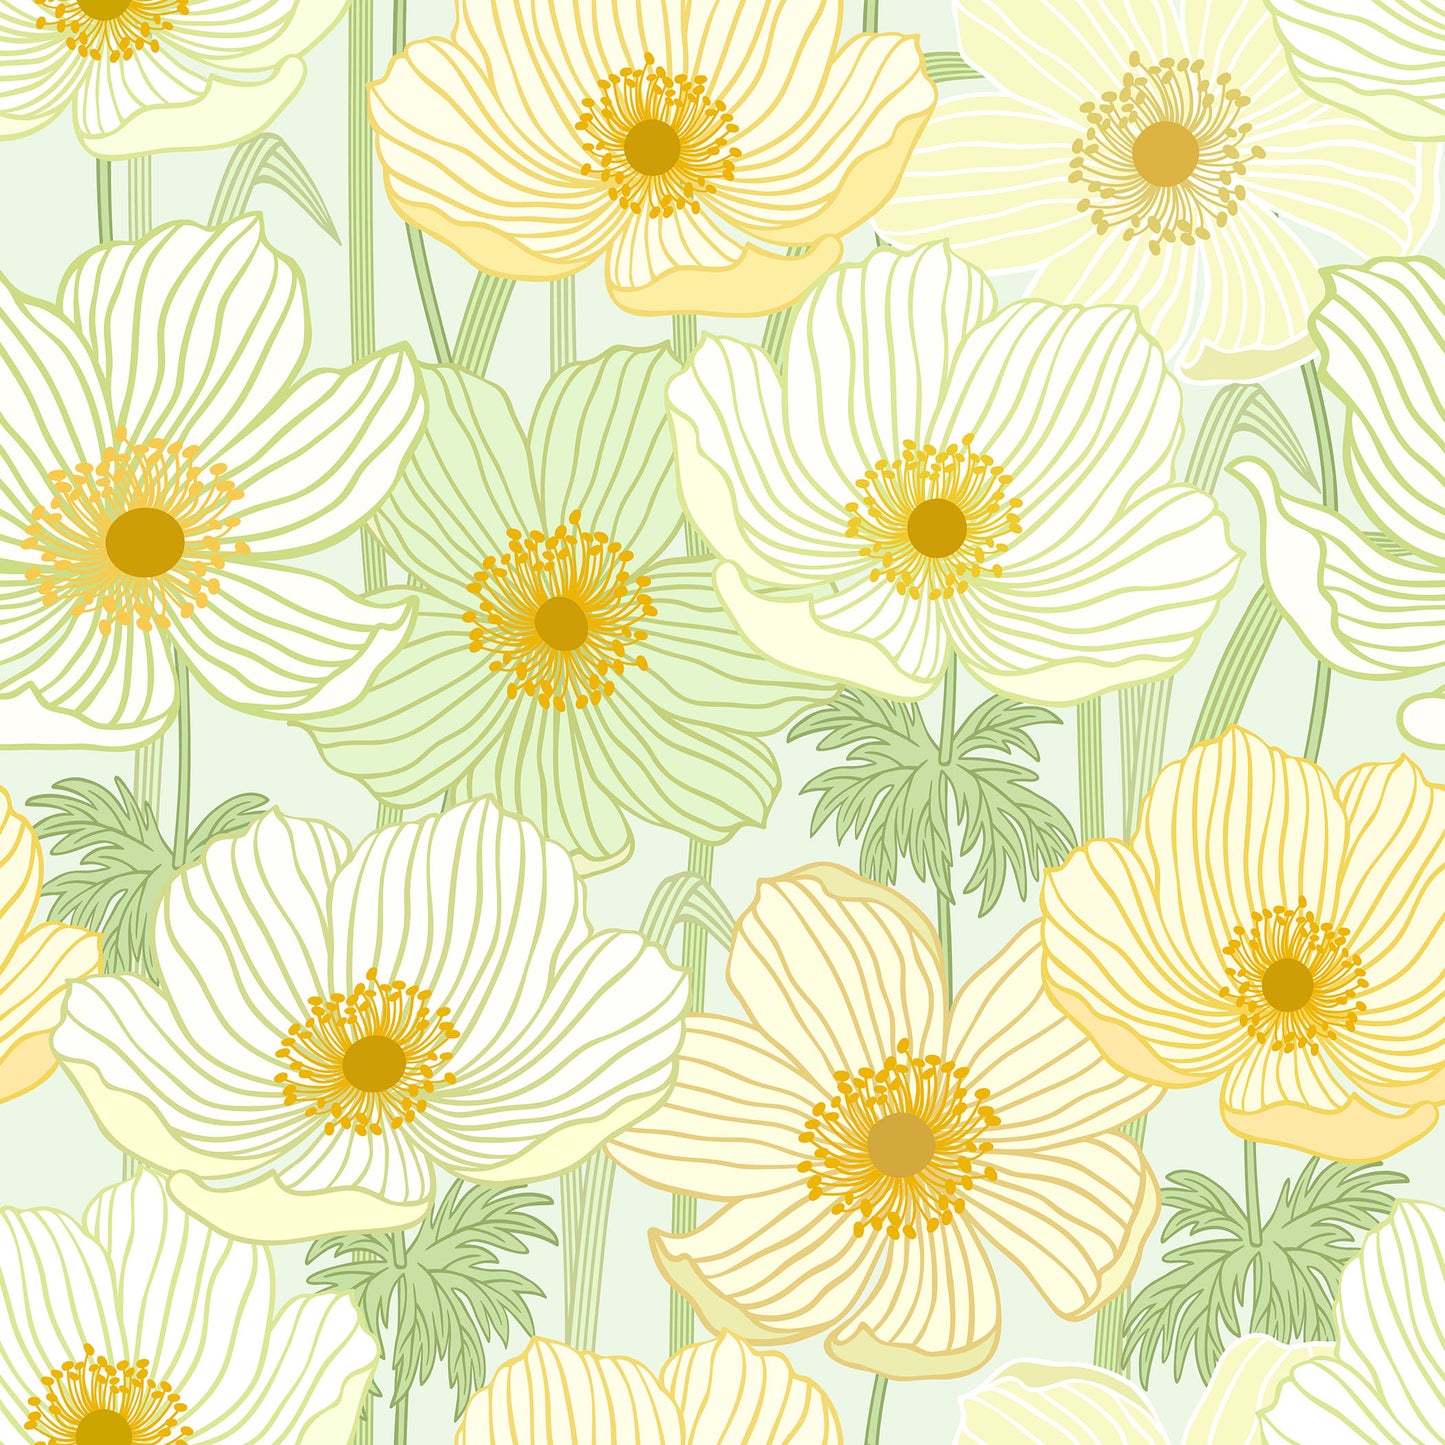 Summer meadow yellow/green poppy floral print cream background easy to install and remove peel and stick custom wallpaper available in different lengths/sizes locally created and printed in Canada wallpaper. Washable, durable, commercial grade, removable and waterproof.